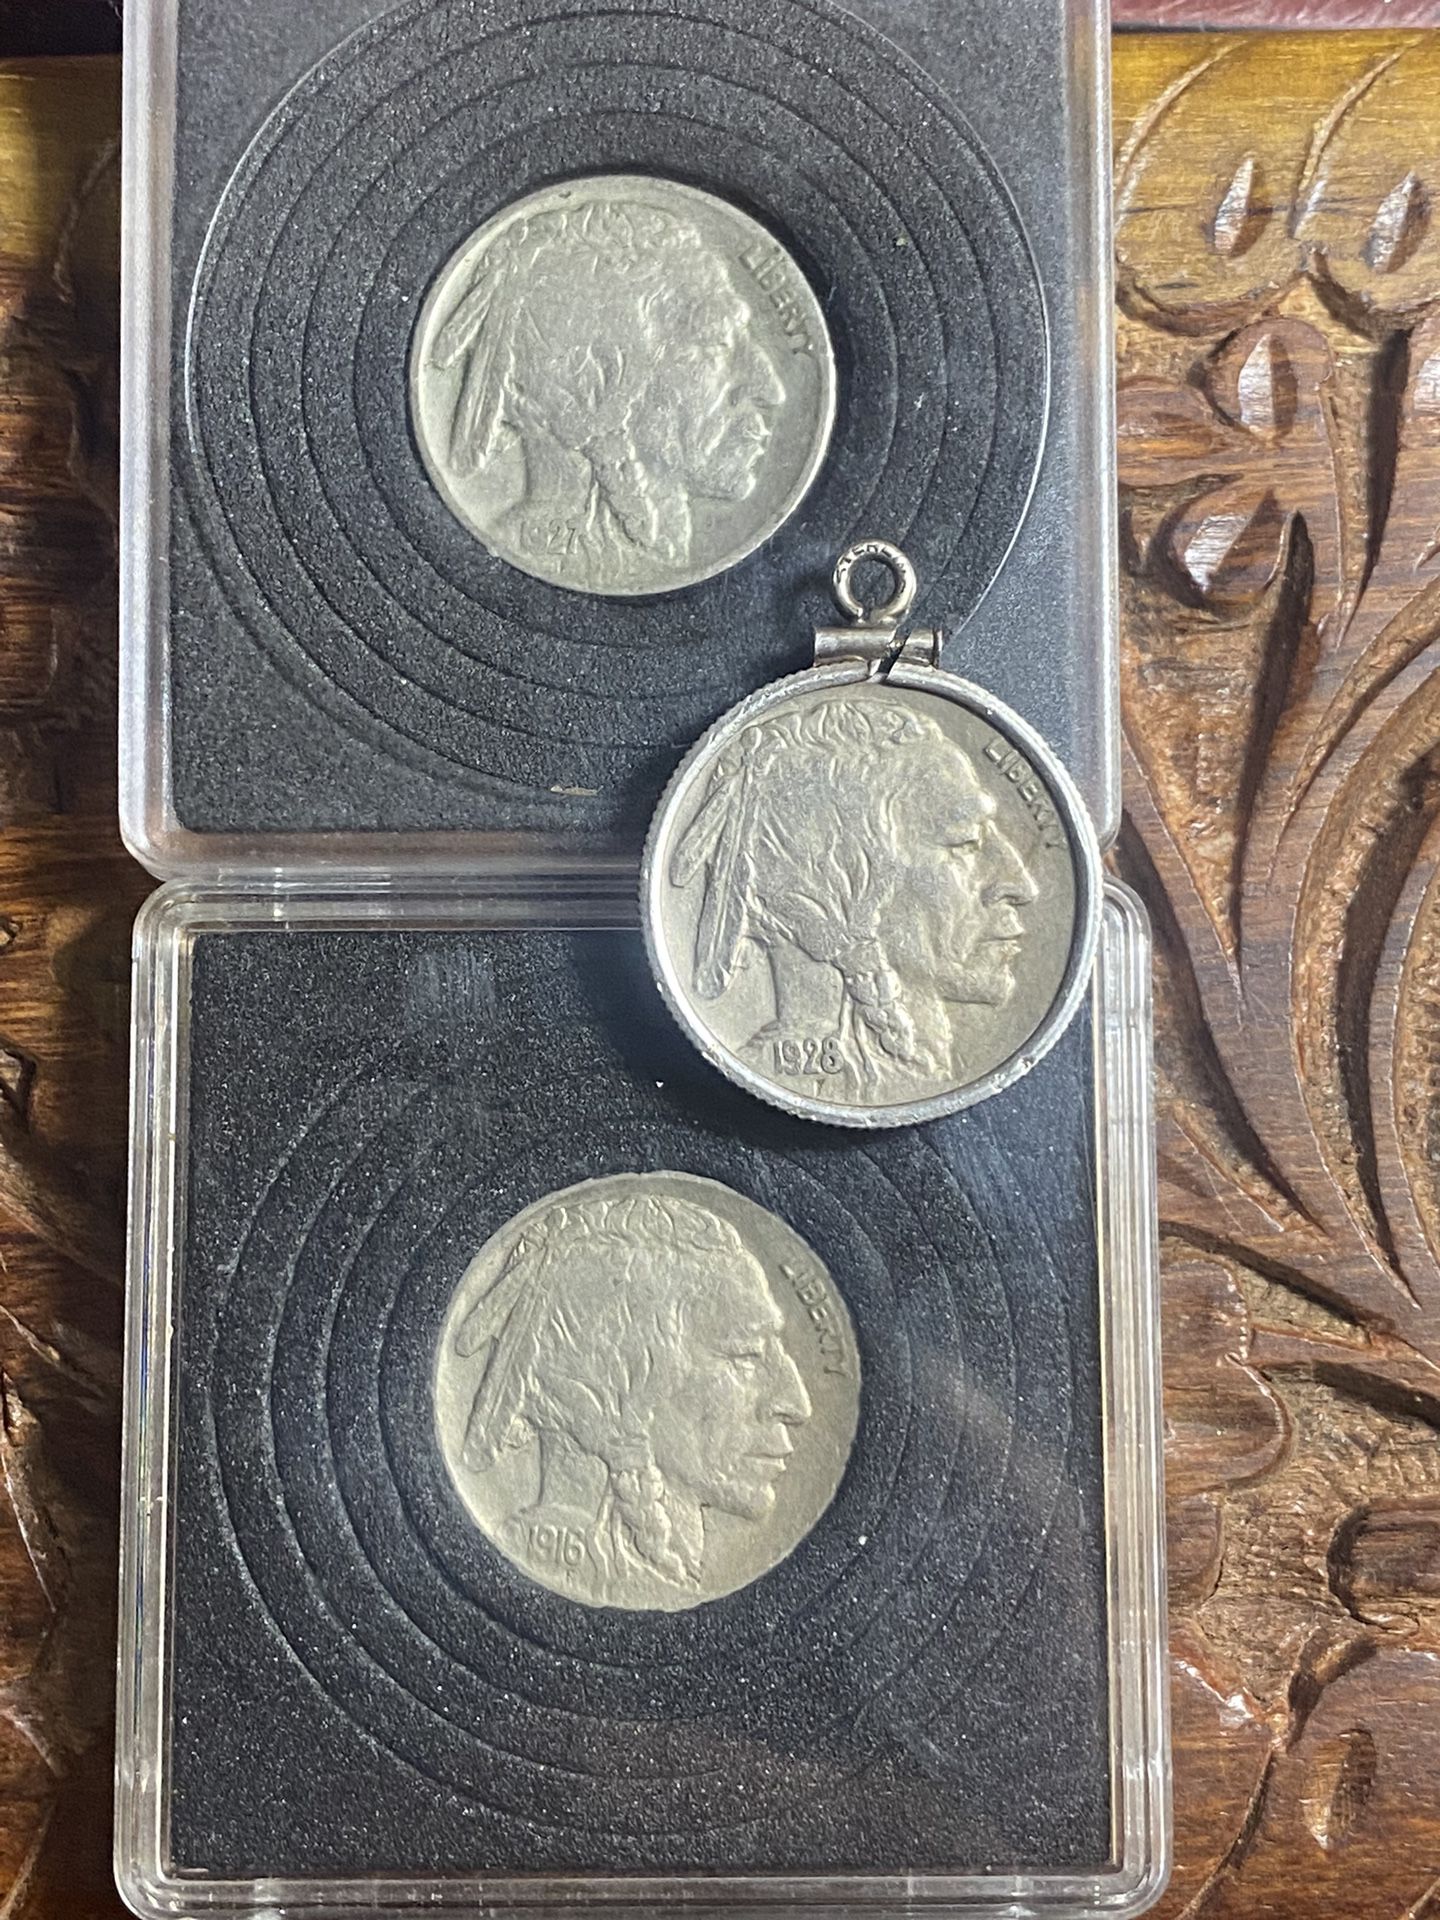 1928 Buffalo Nickel D With A Sterling Silver Bezel And Two More Buffalo Nickels 1916 And 1927